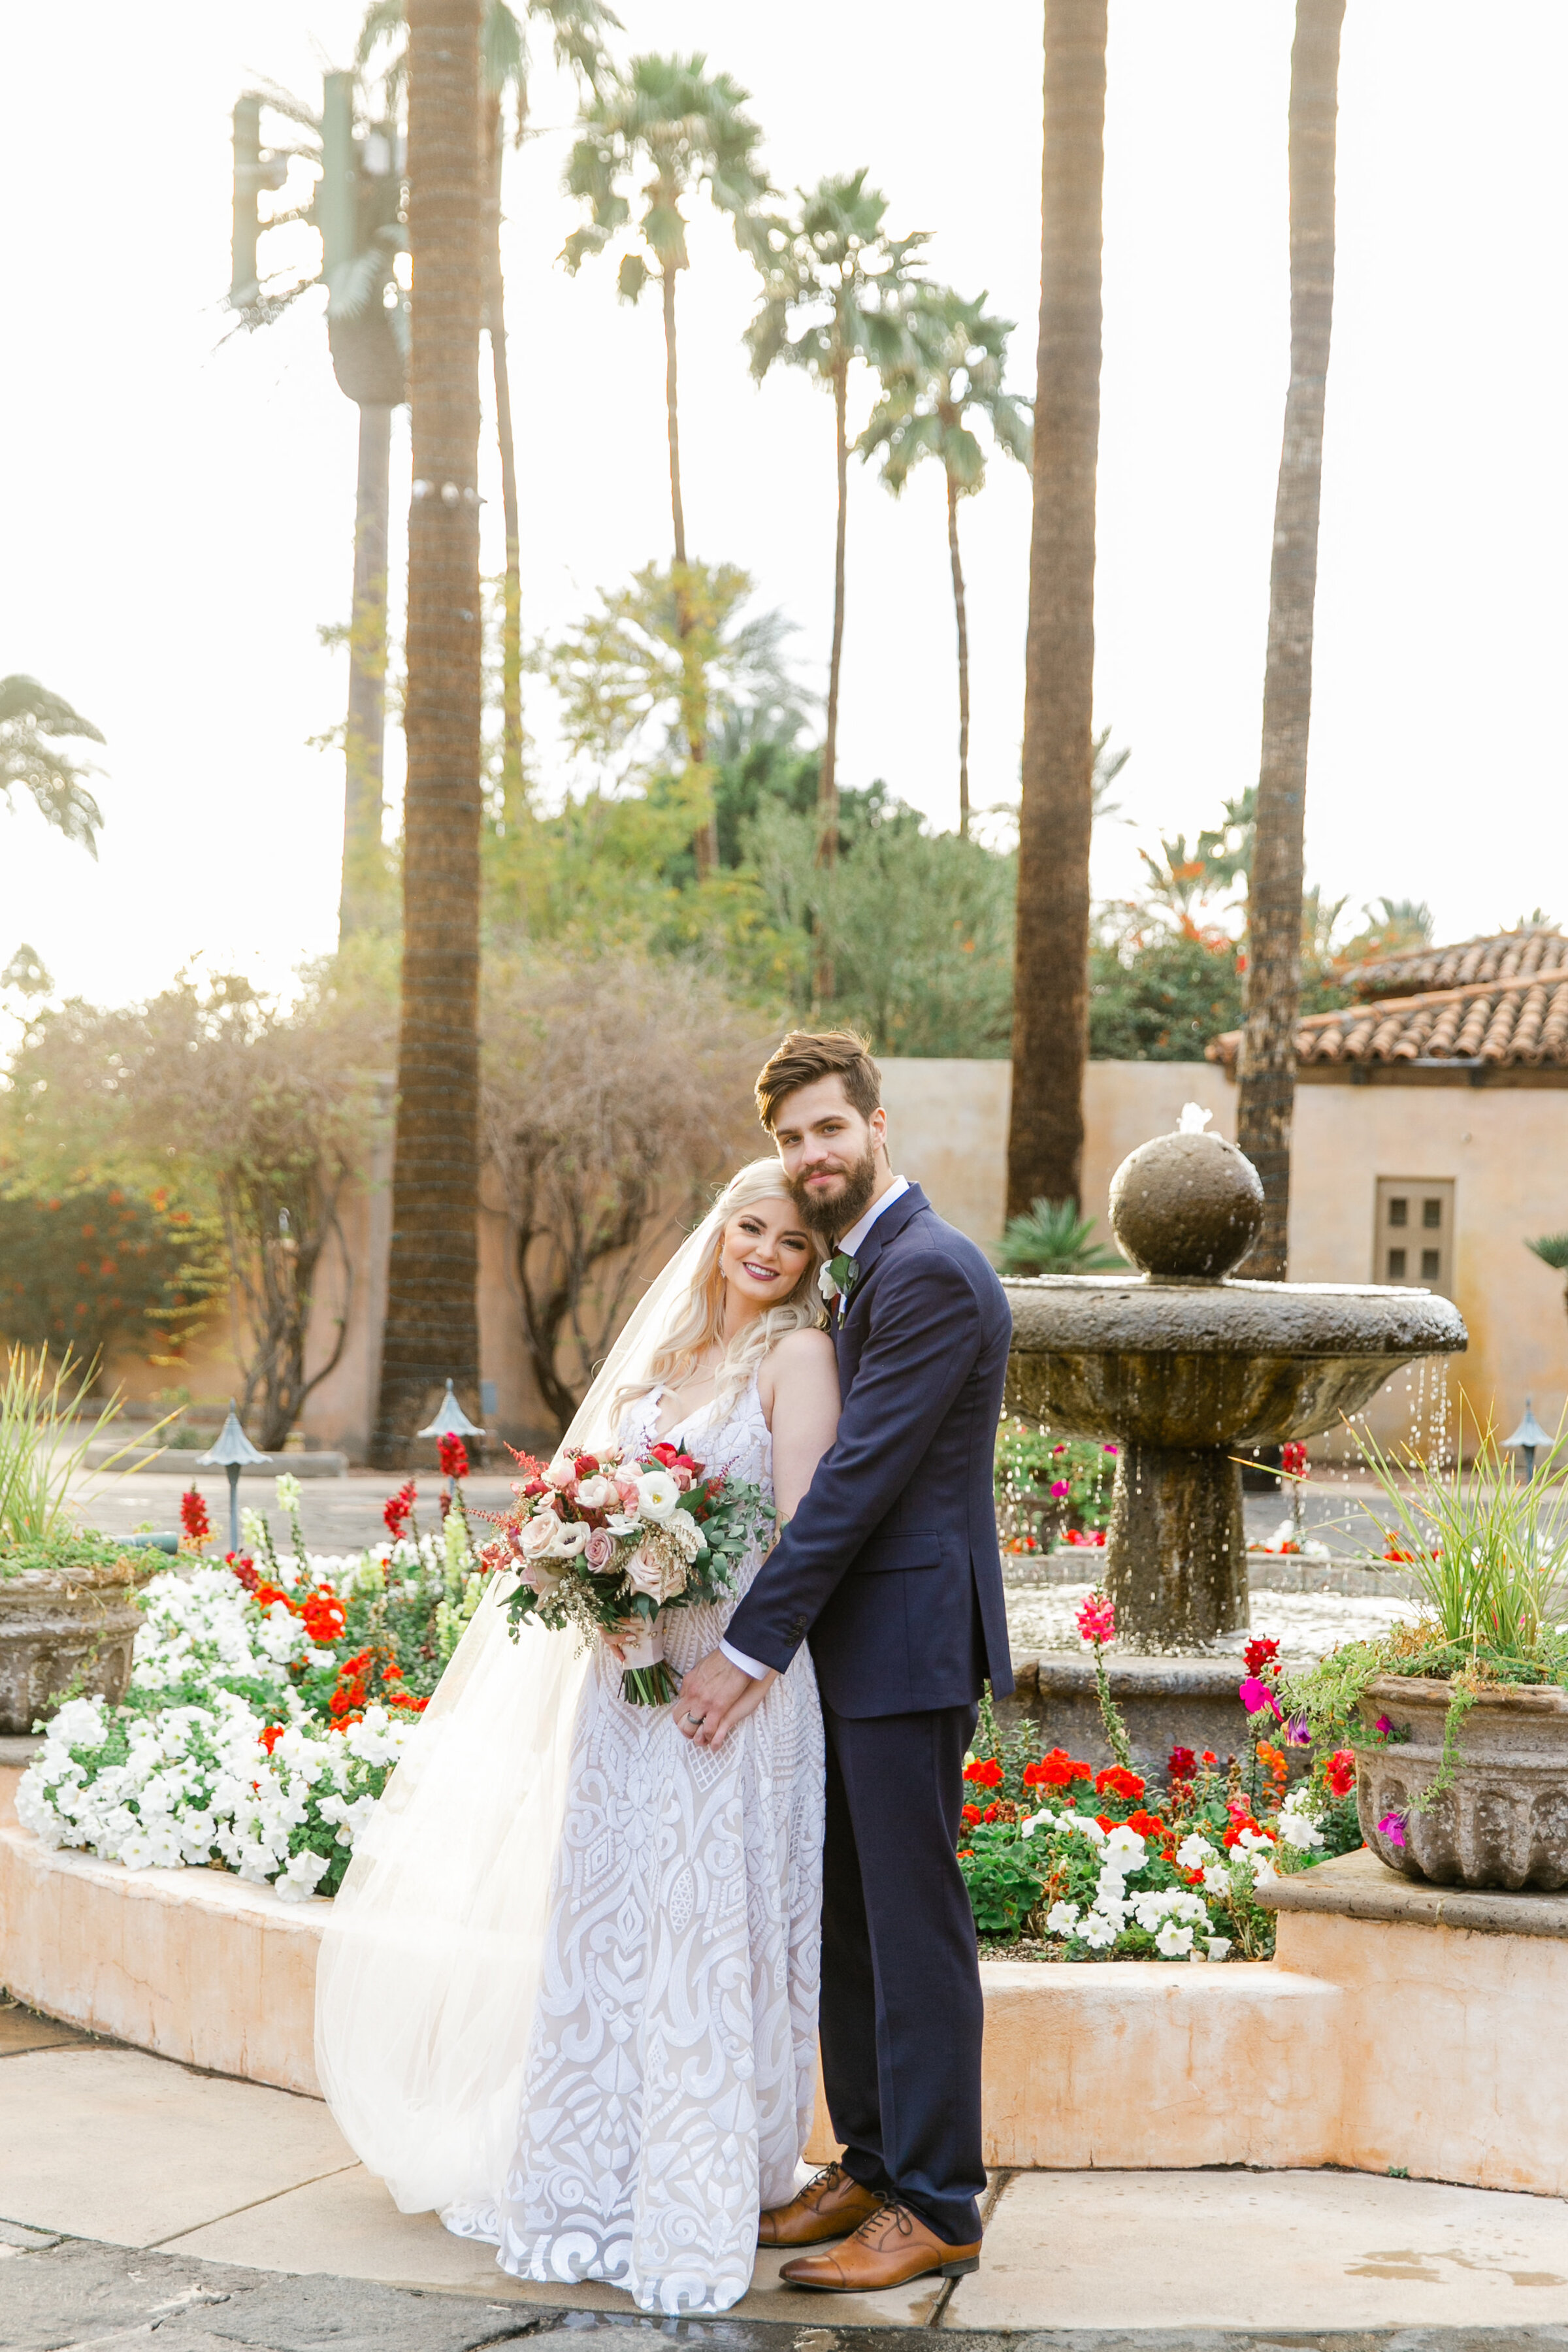 Karlie Colleen Photography - The Royal Palms Wedding - Some Like It Classic - Alex & Sam-539